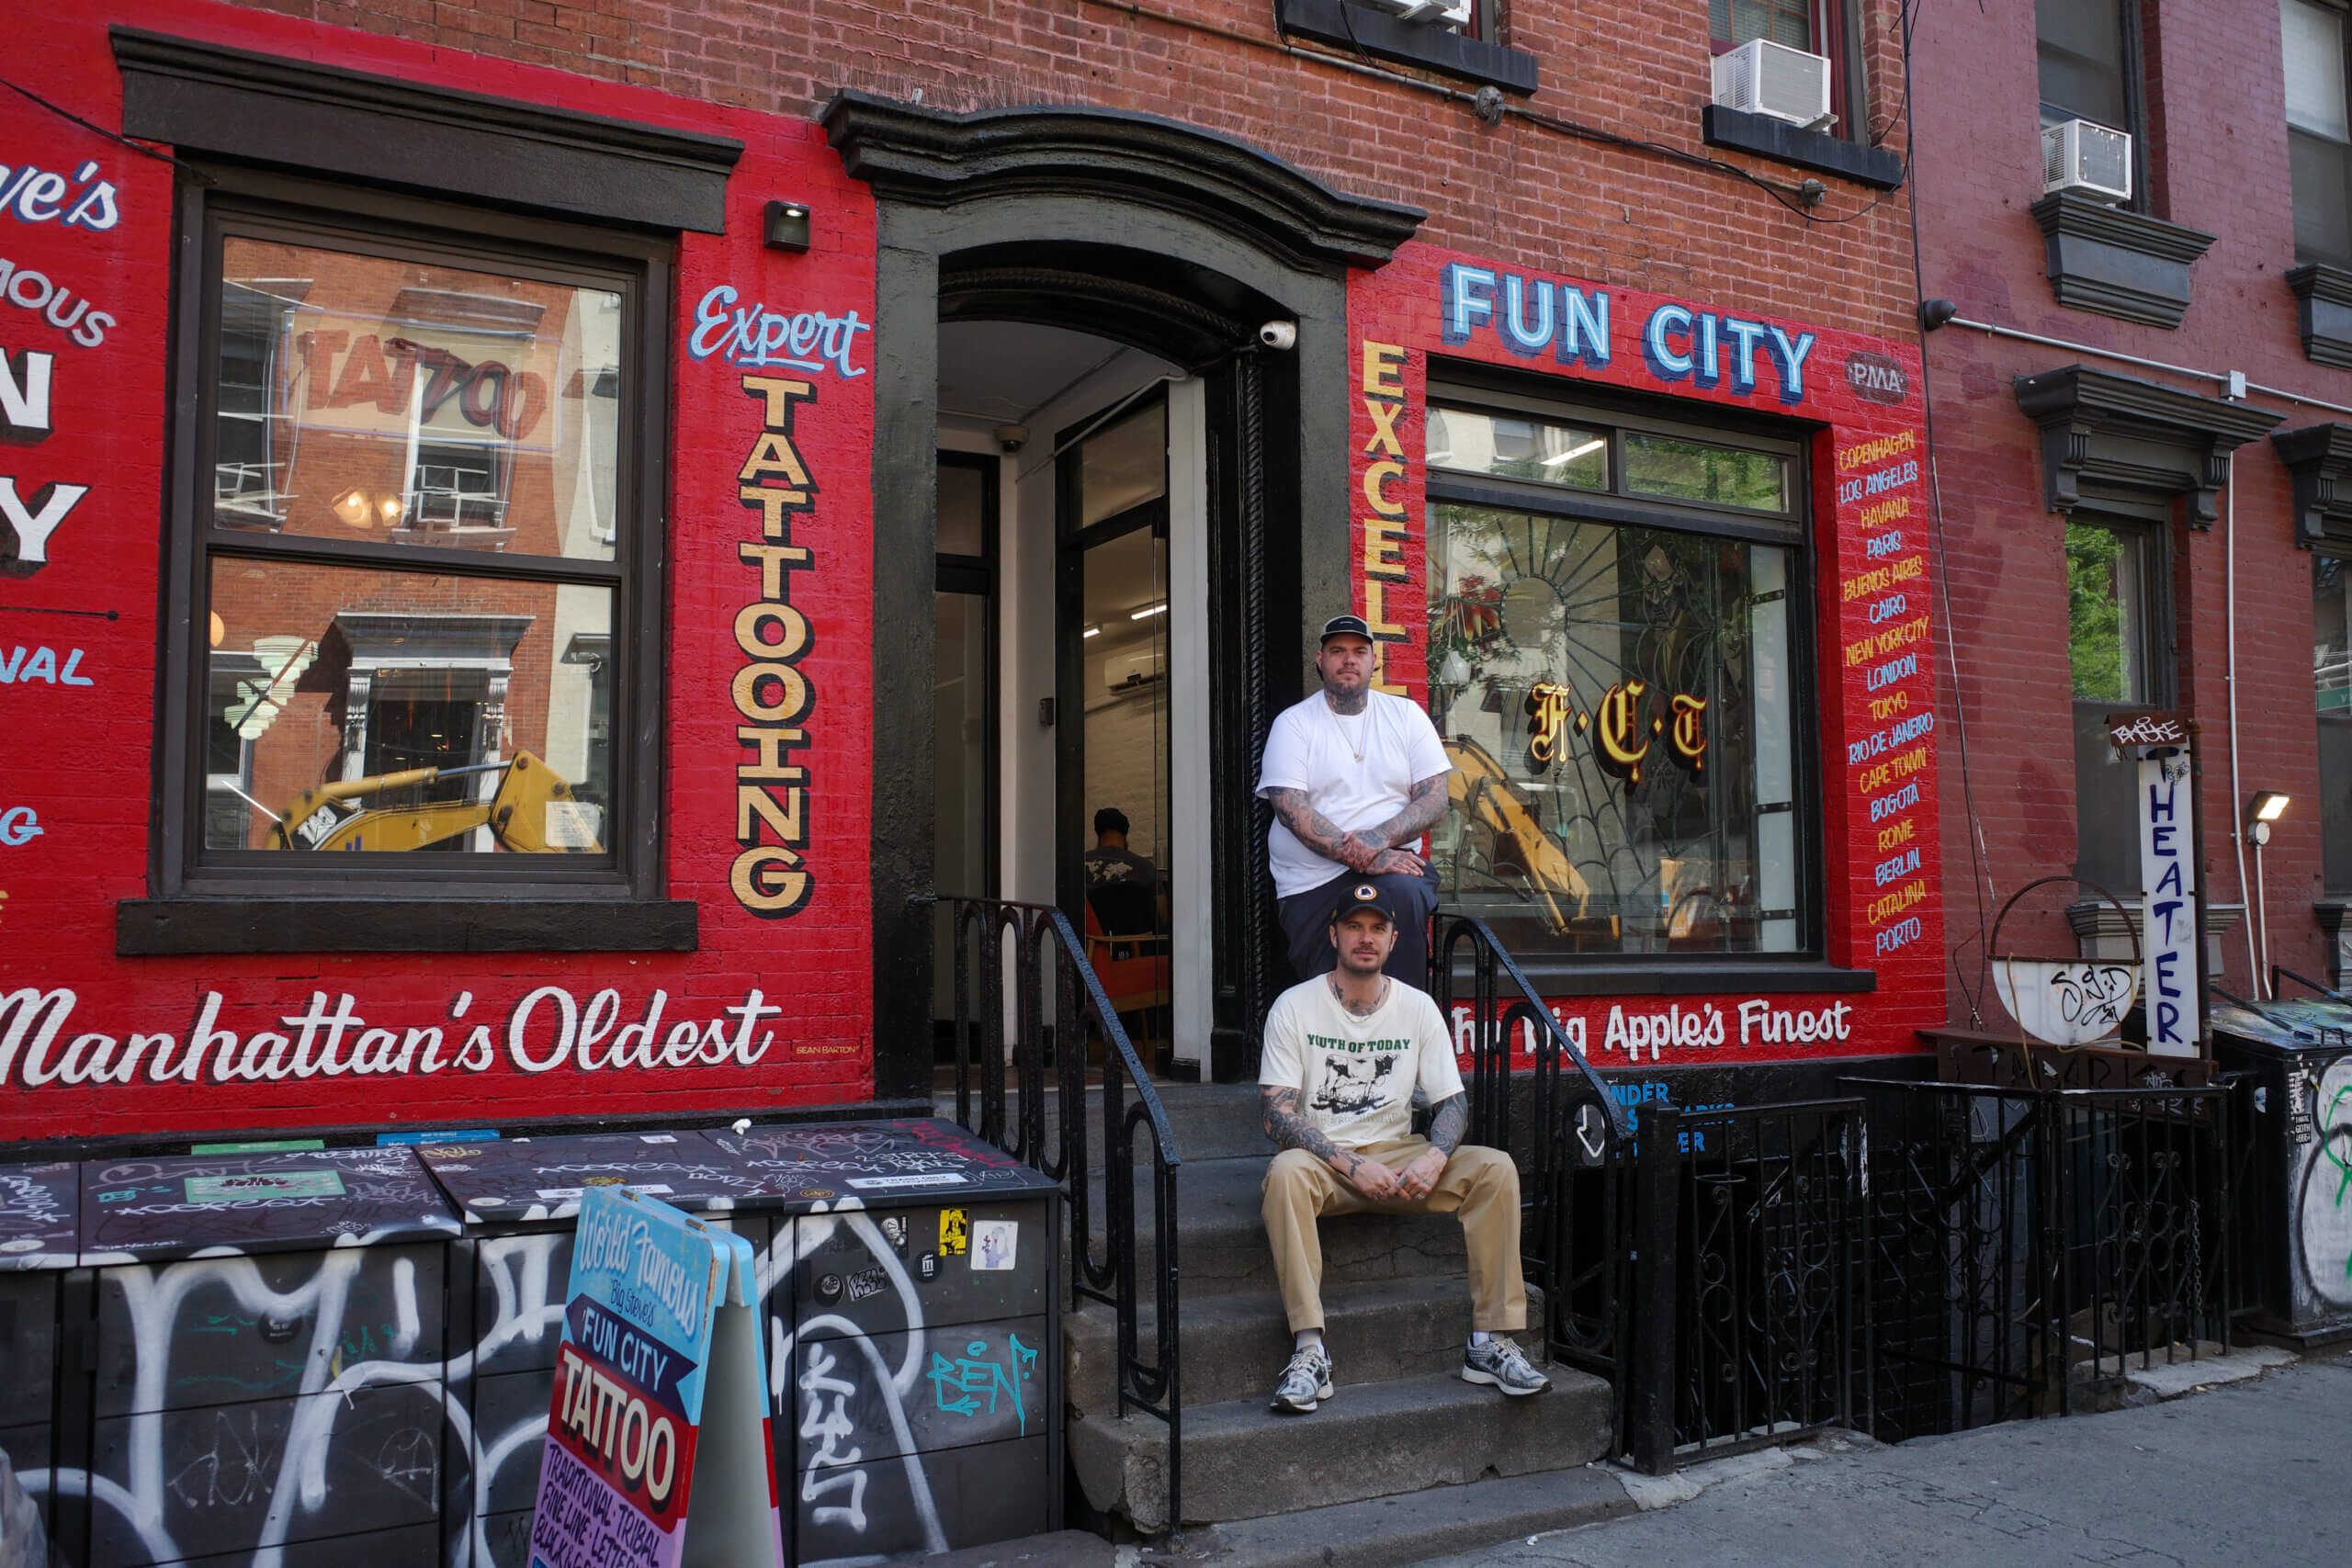 Fun City Tattoo keeps legacy alive in the East Village